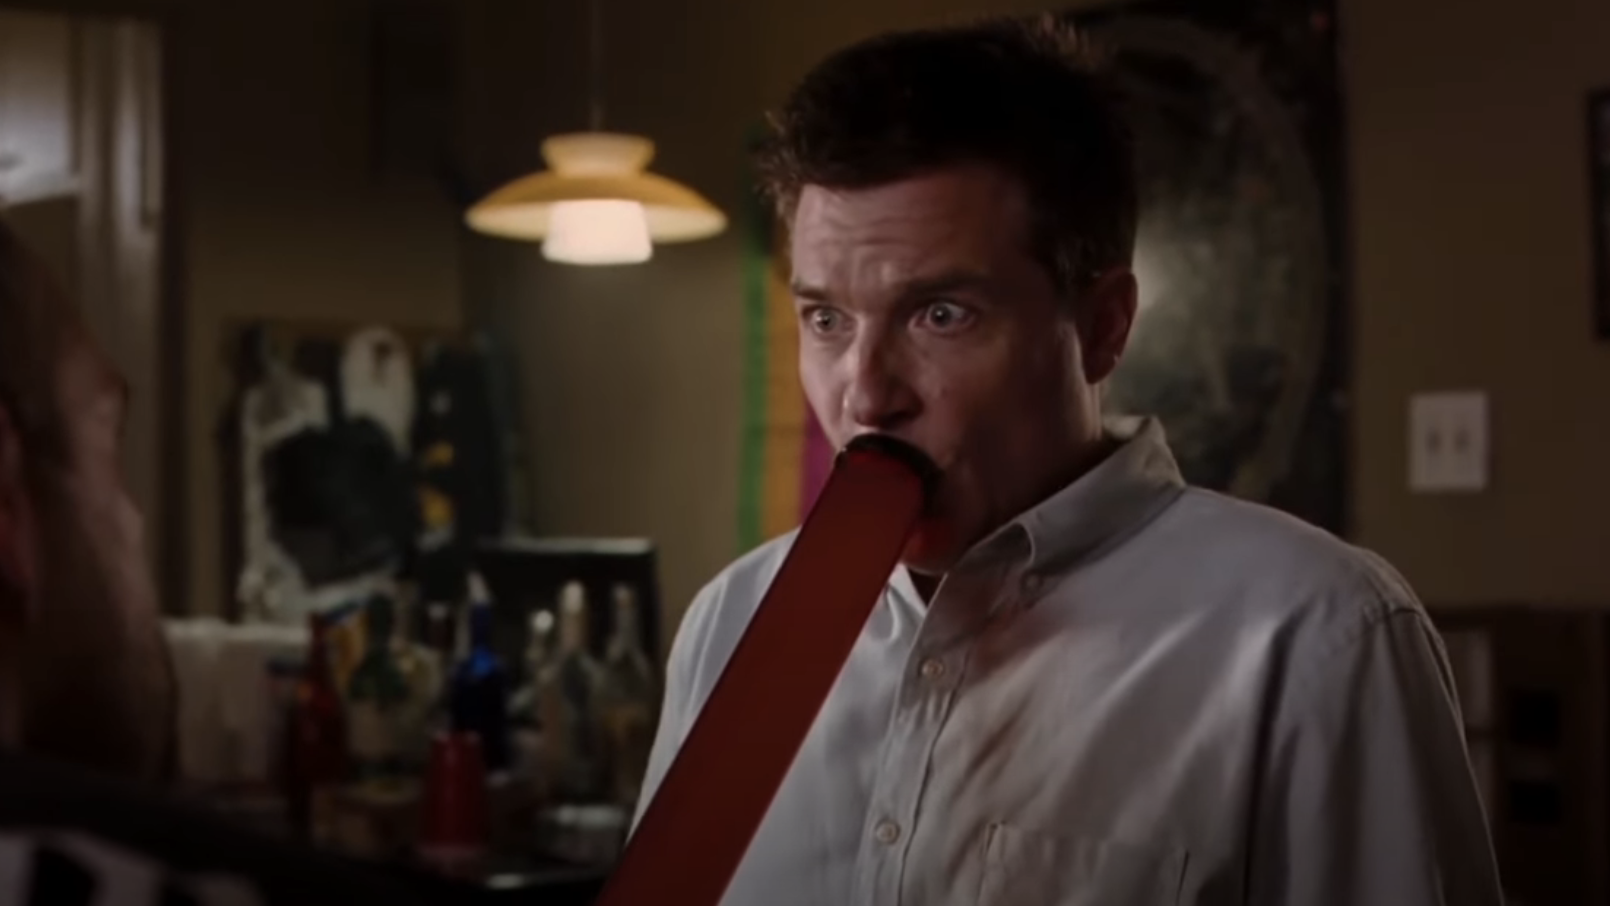 Jason Bateman with a large flat object in his mouth, appearing startled in a scene from a movie